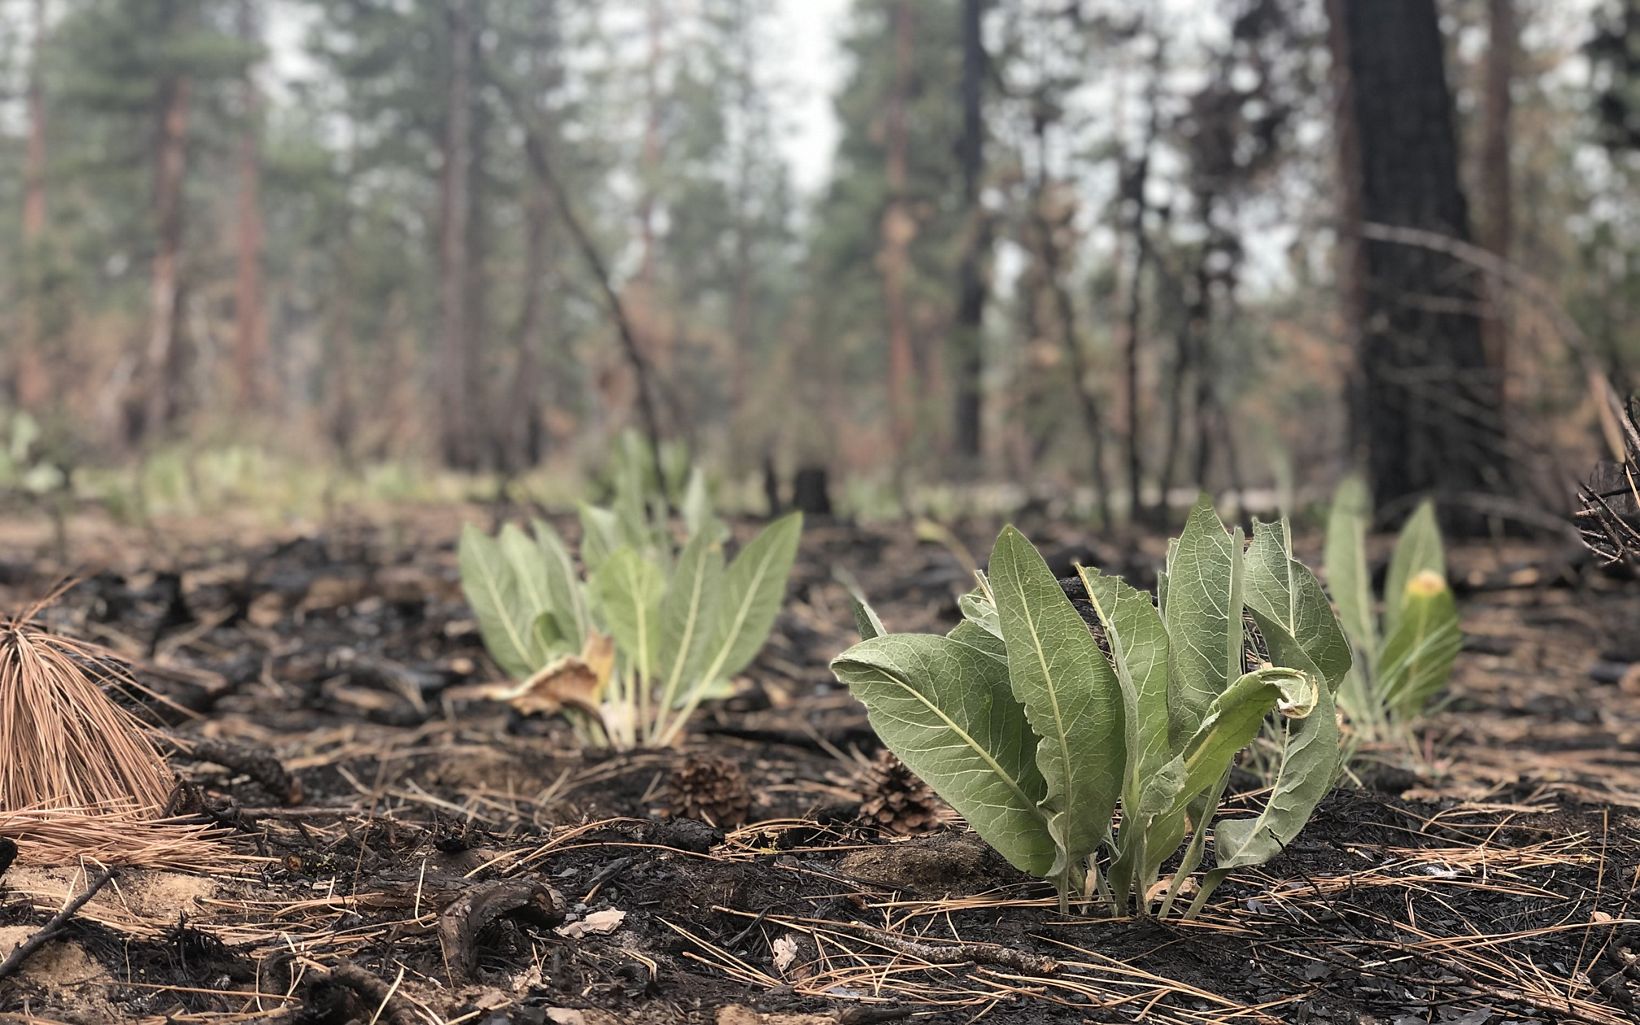 Vegetation sprouts from the soil in a burned forest.